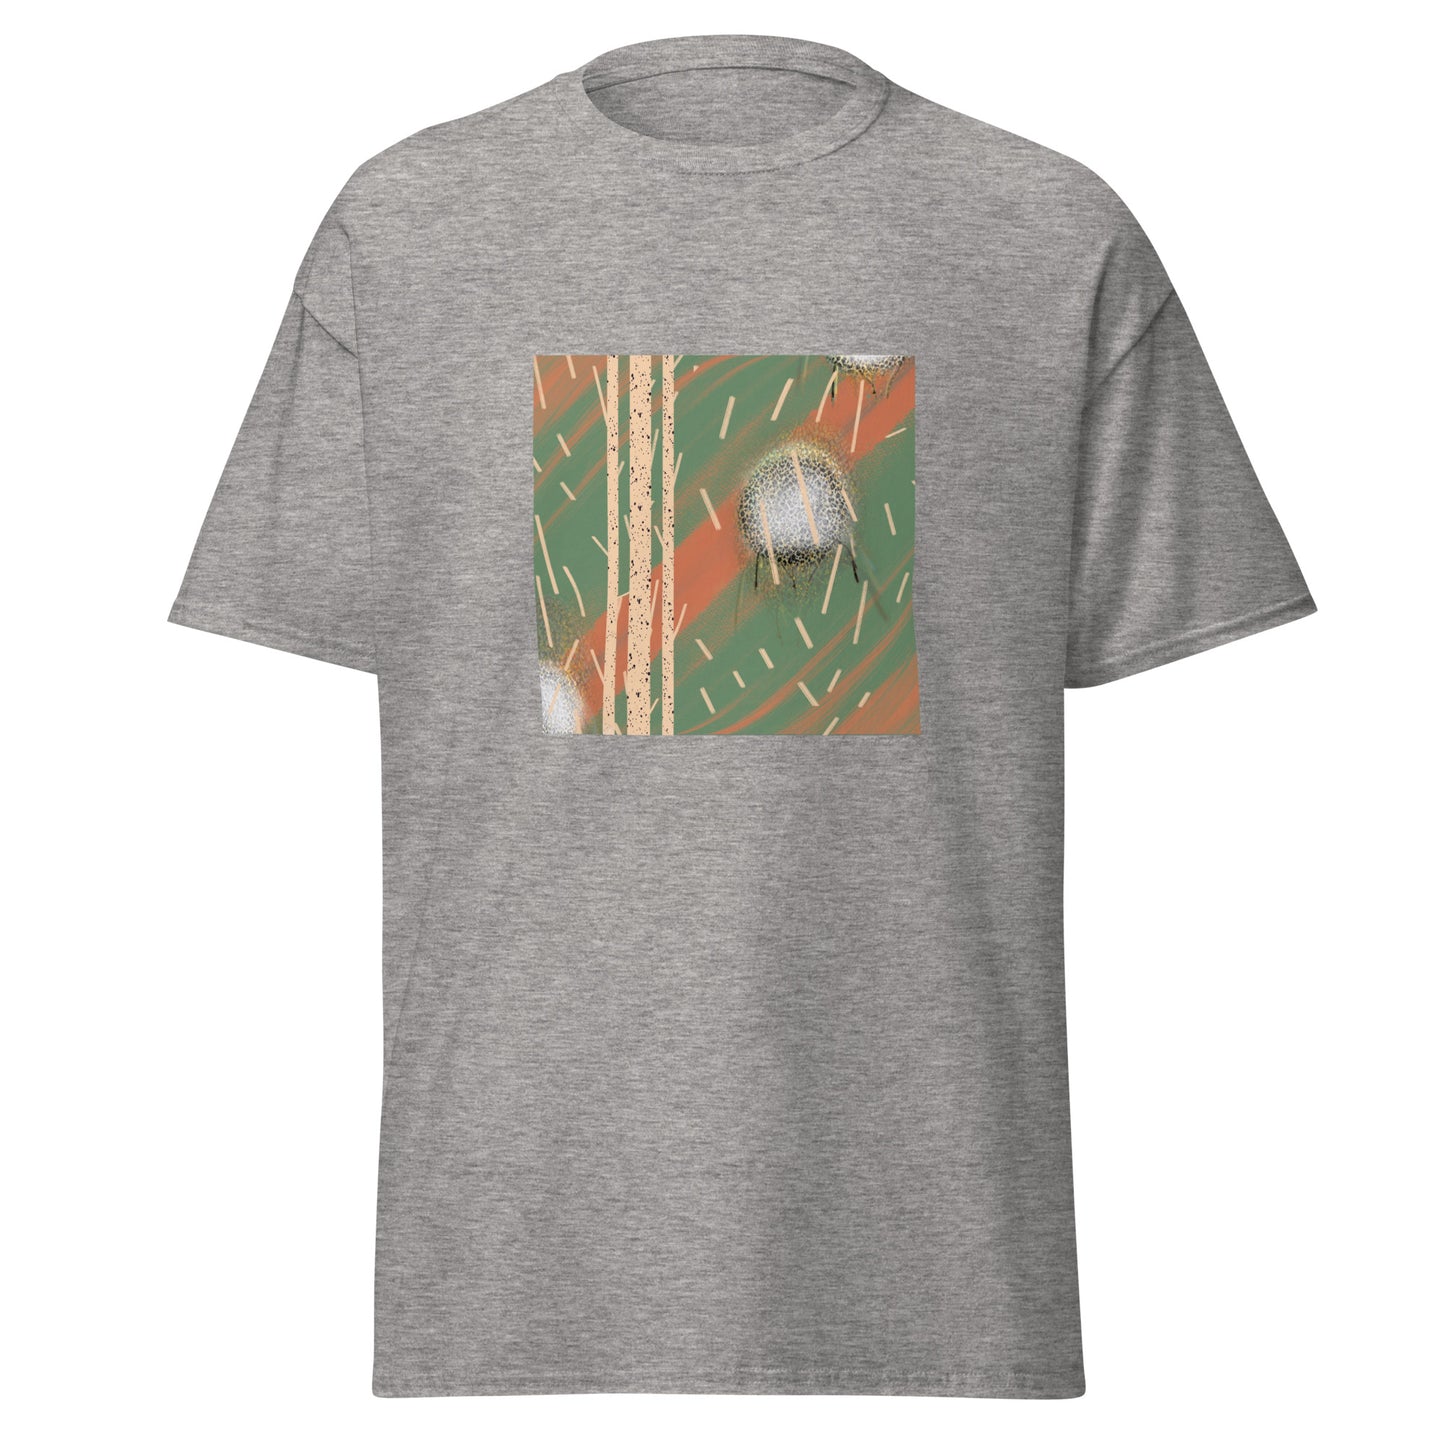 The Moon's Vacation Days IV-VII Classic Tee